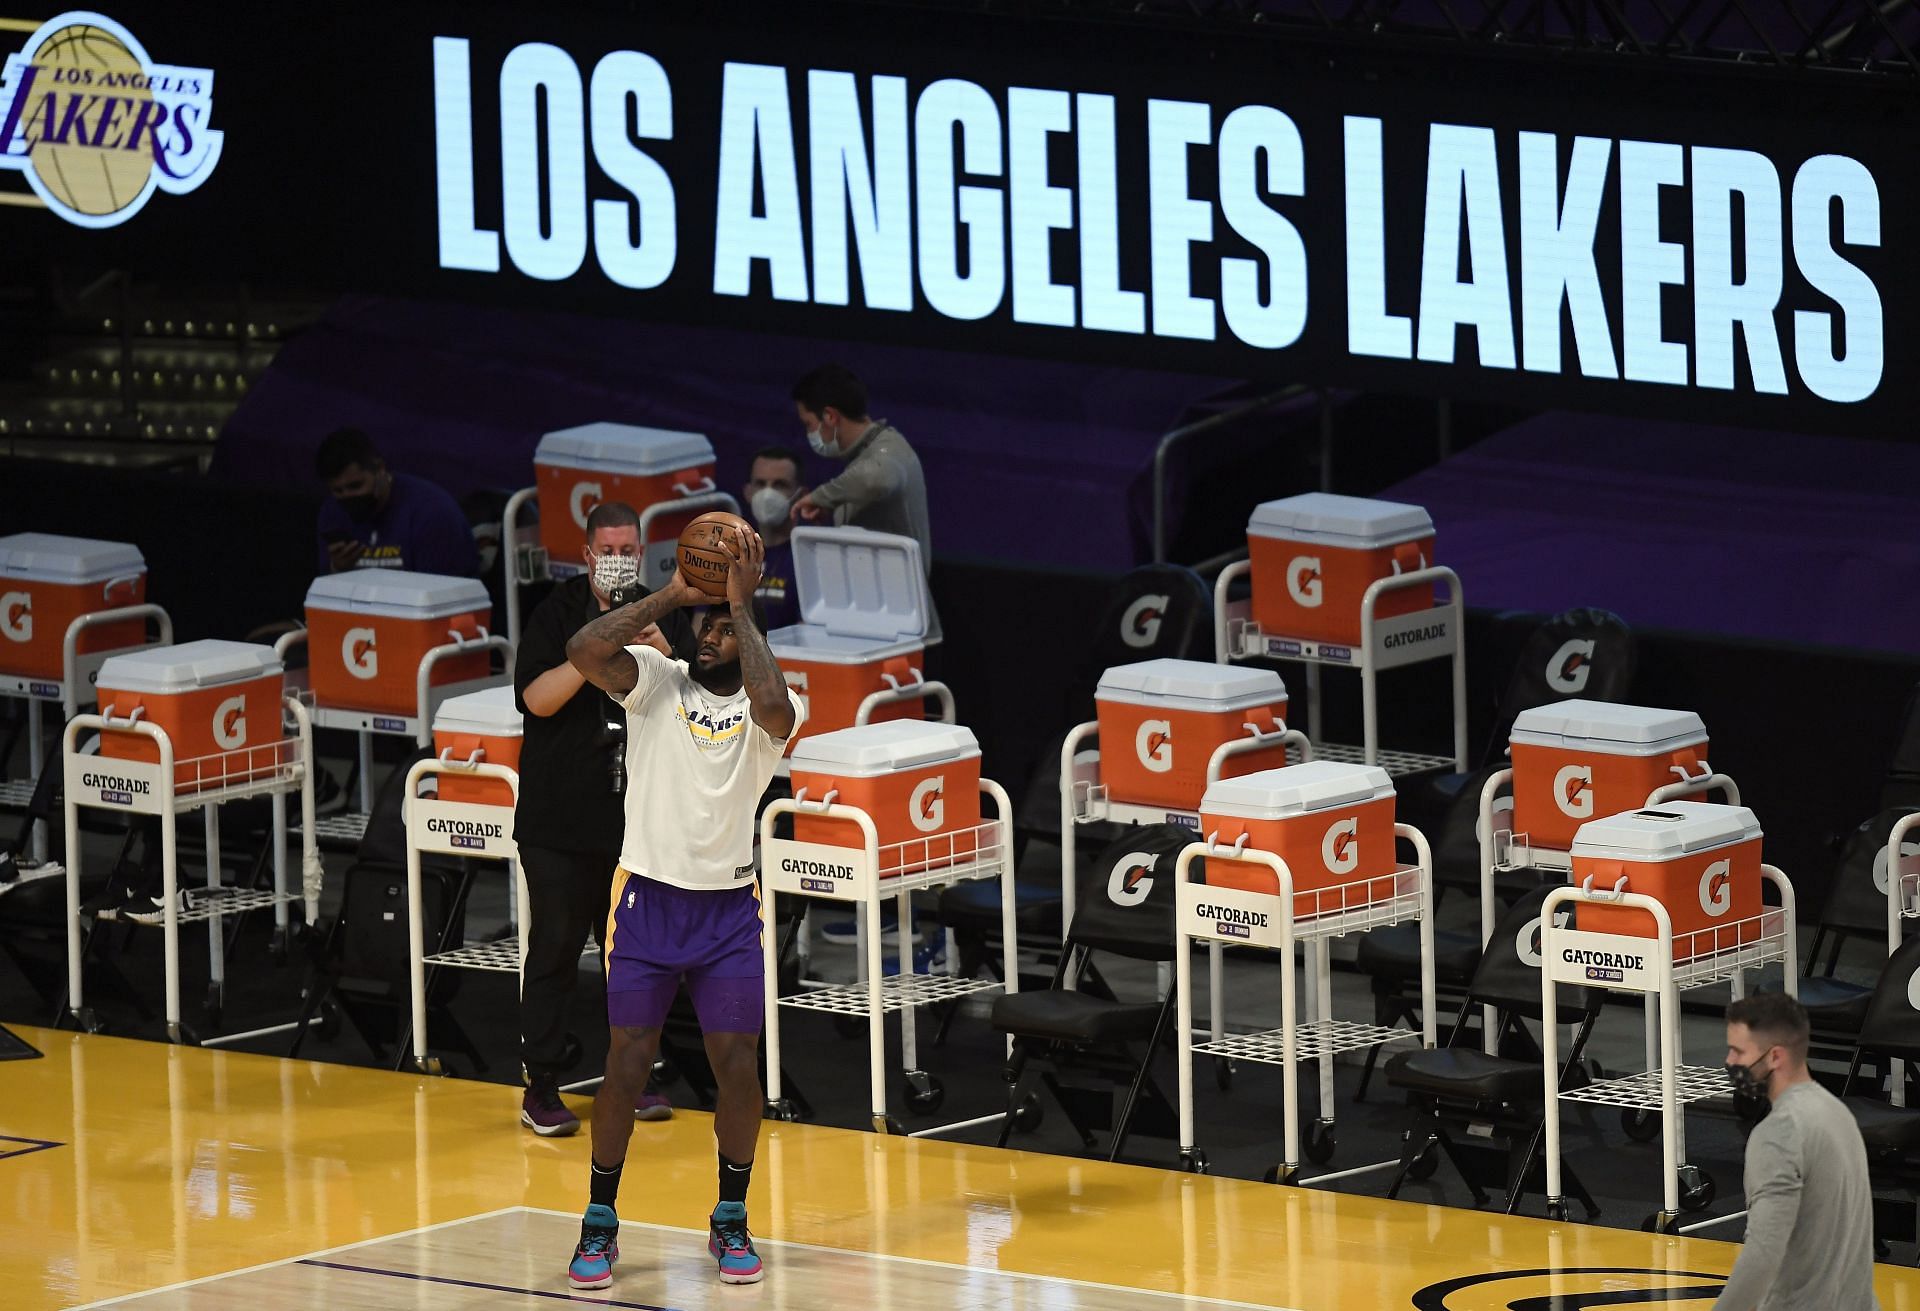 LeBron James gets his shots up ahead of an LA Lakers game